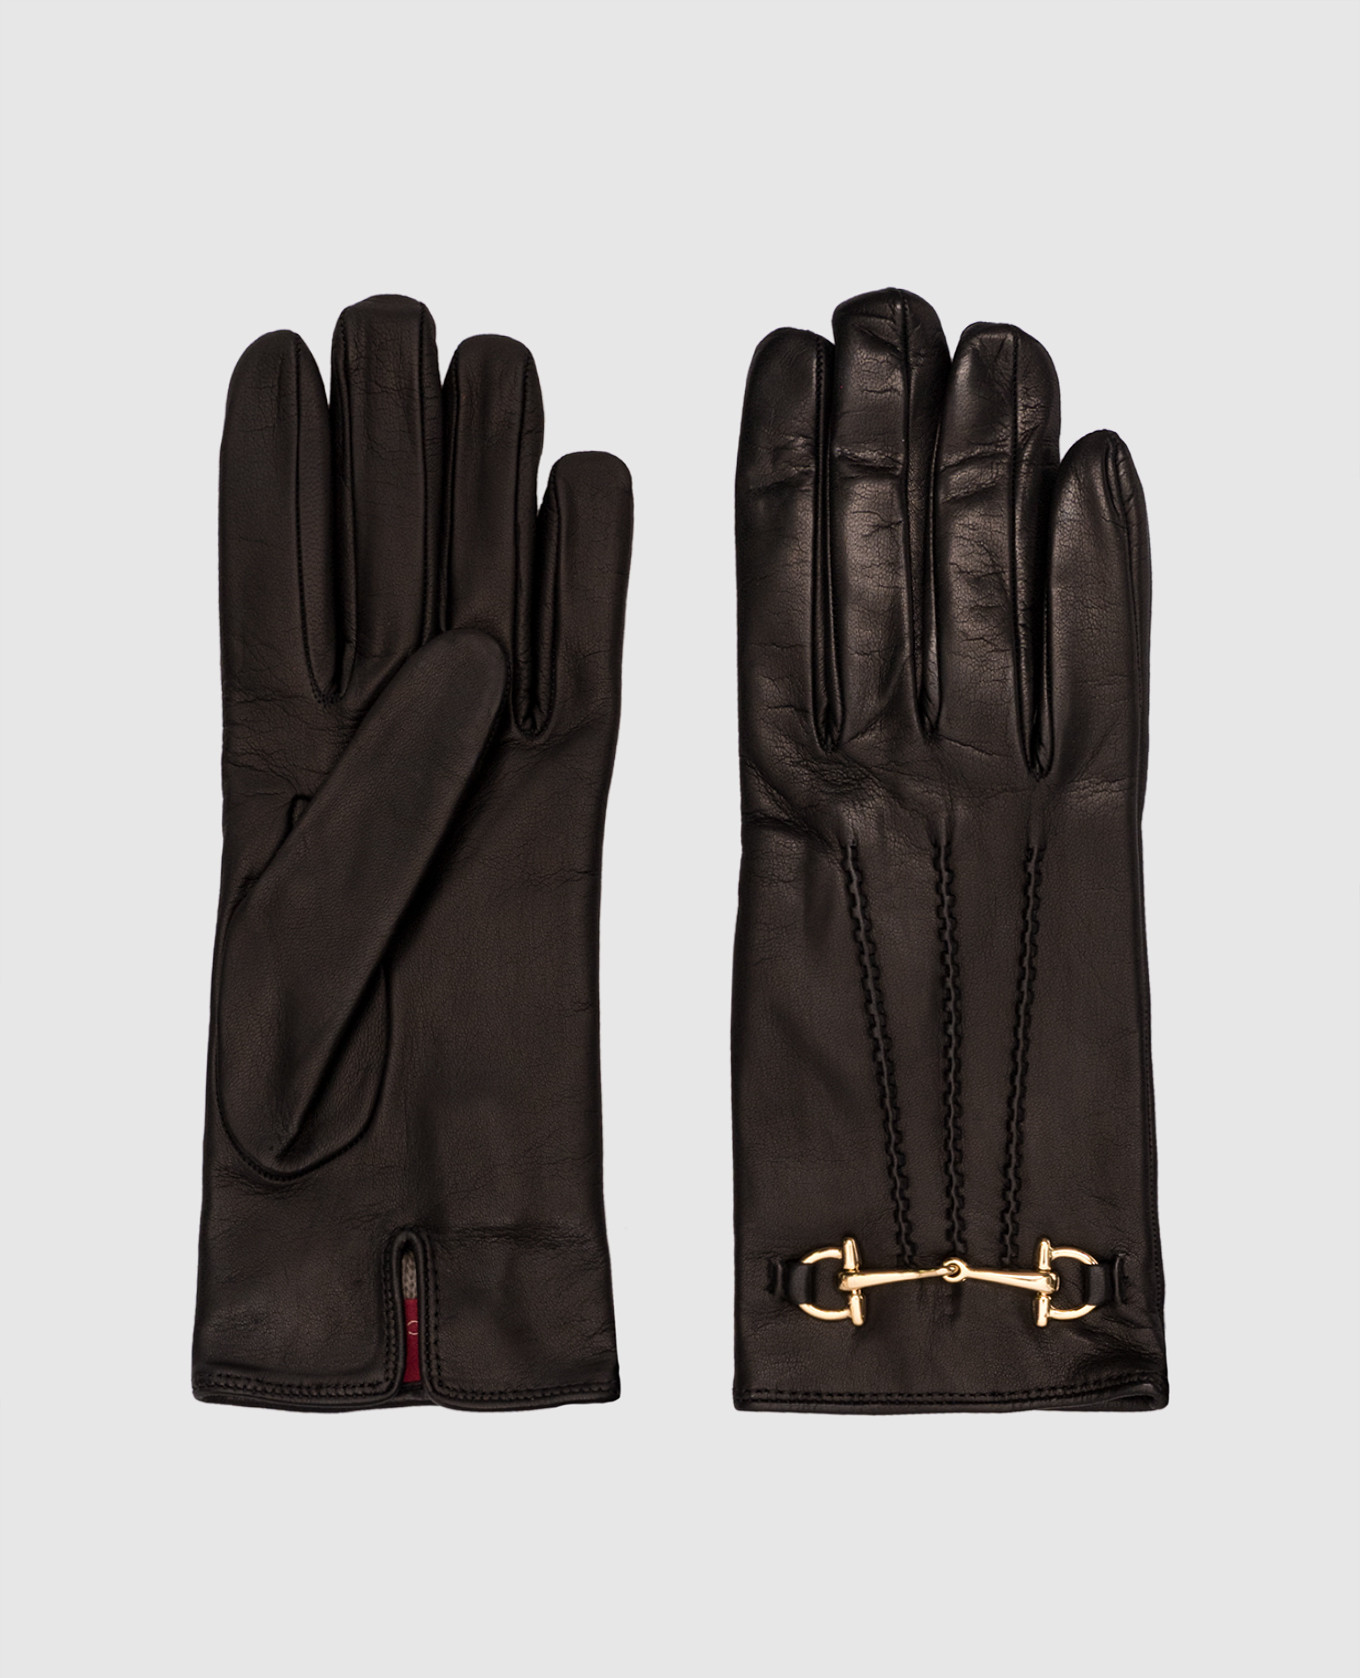 Black leather gloves with a chain